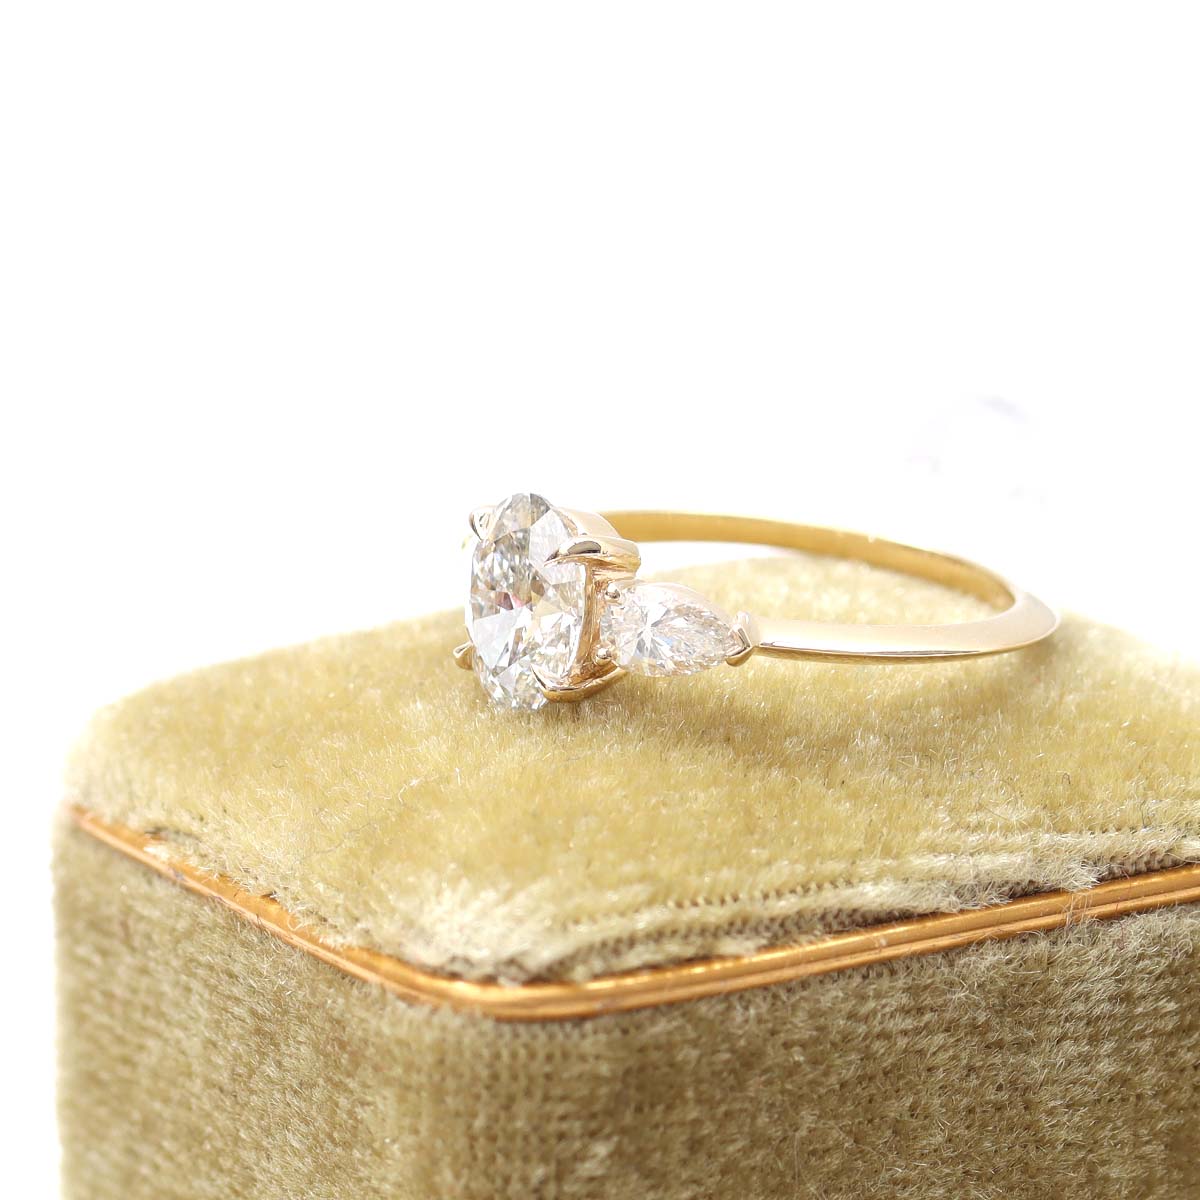 The Shelby Oval Three Stone Engagement Ring #3515-1